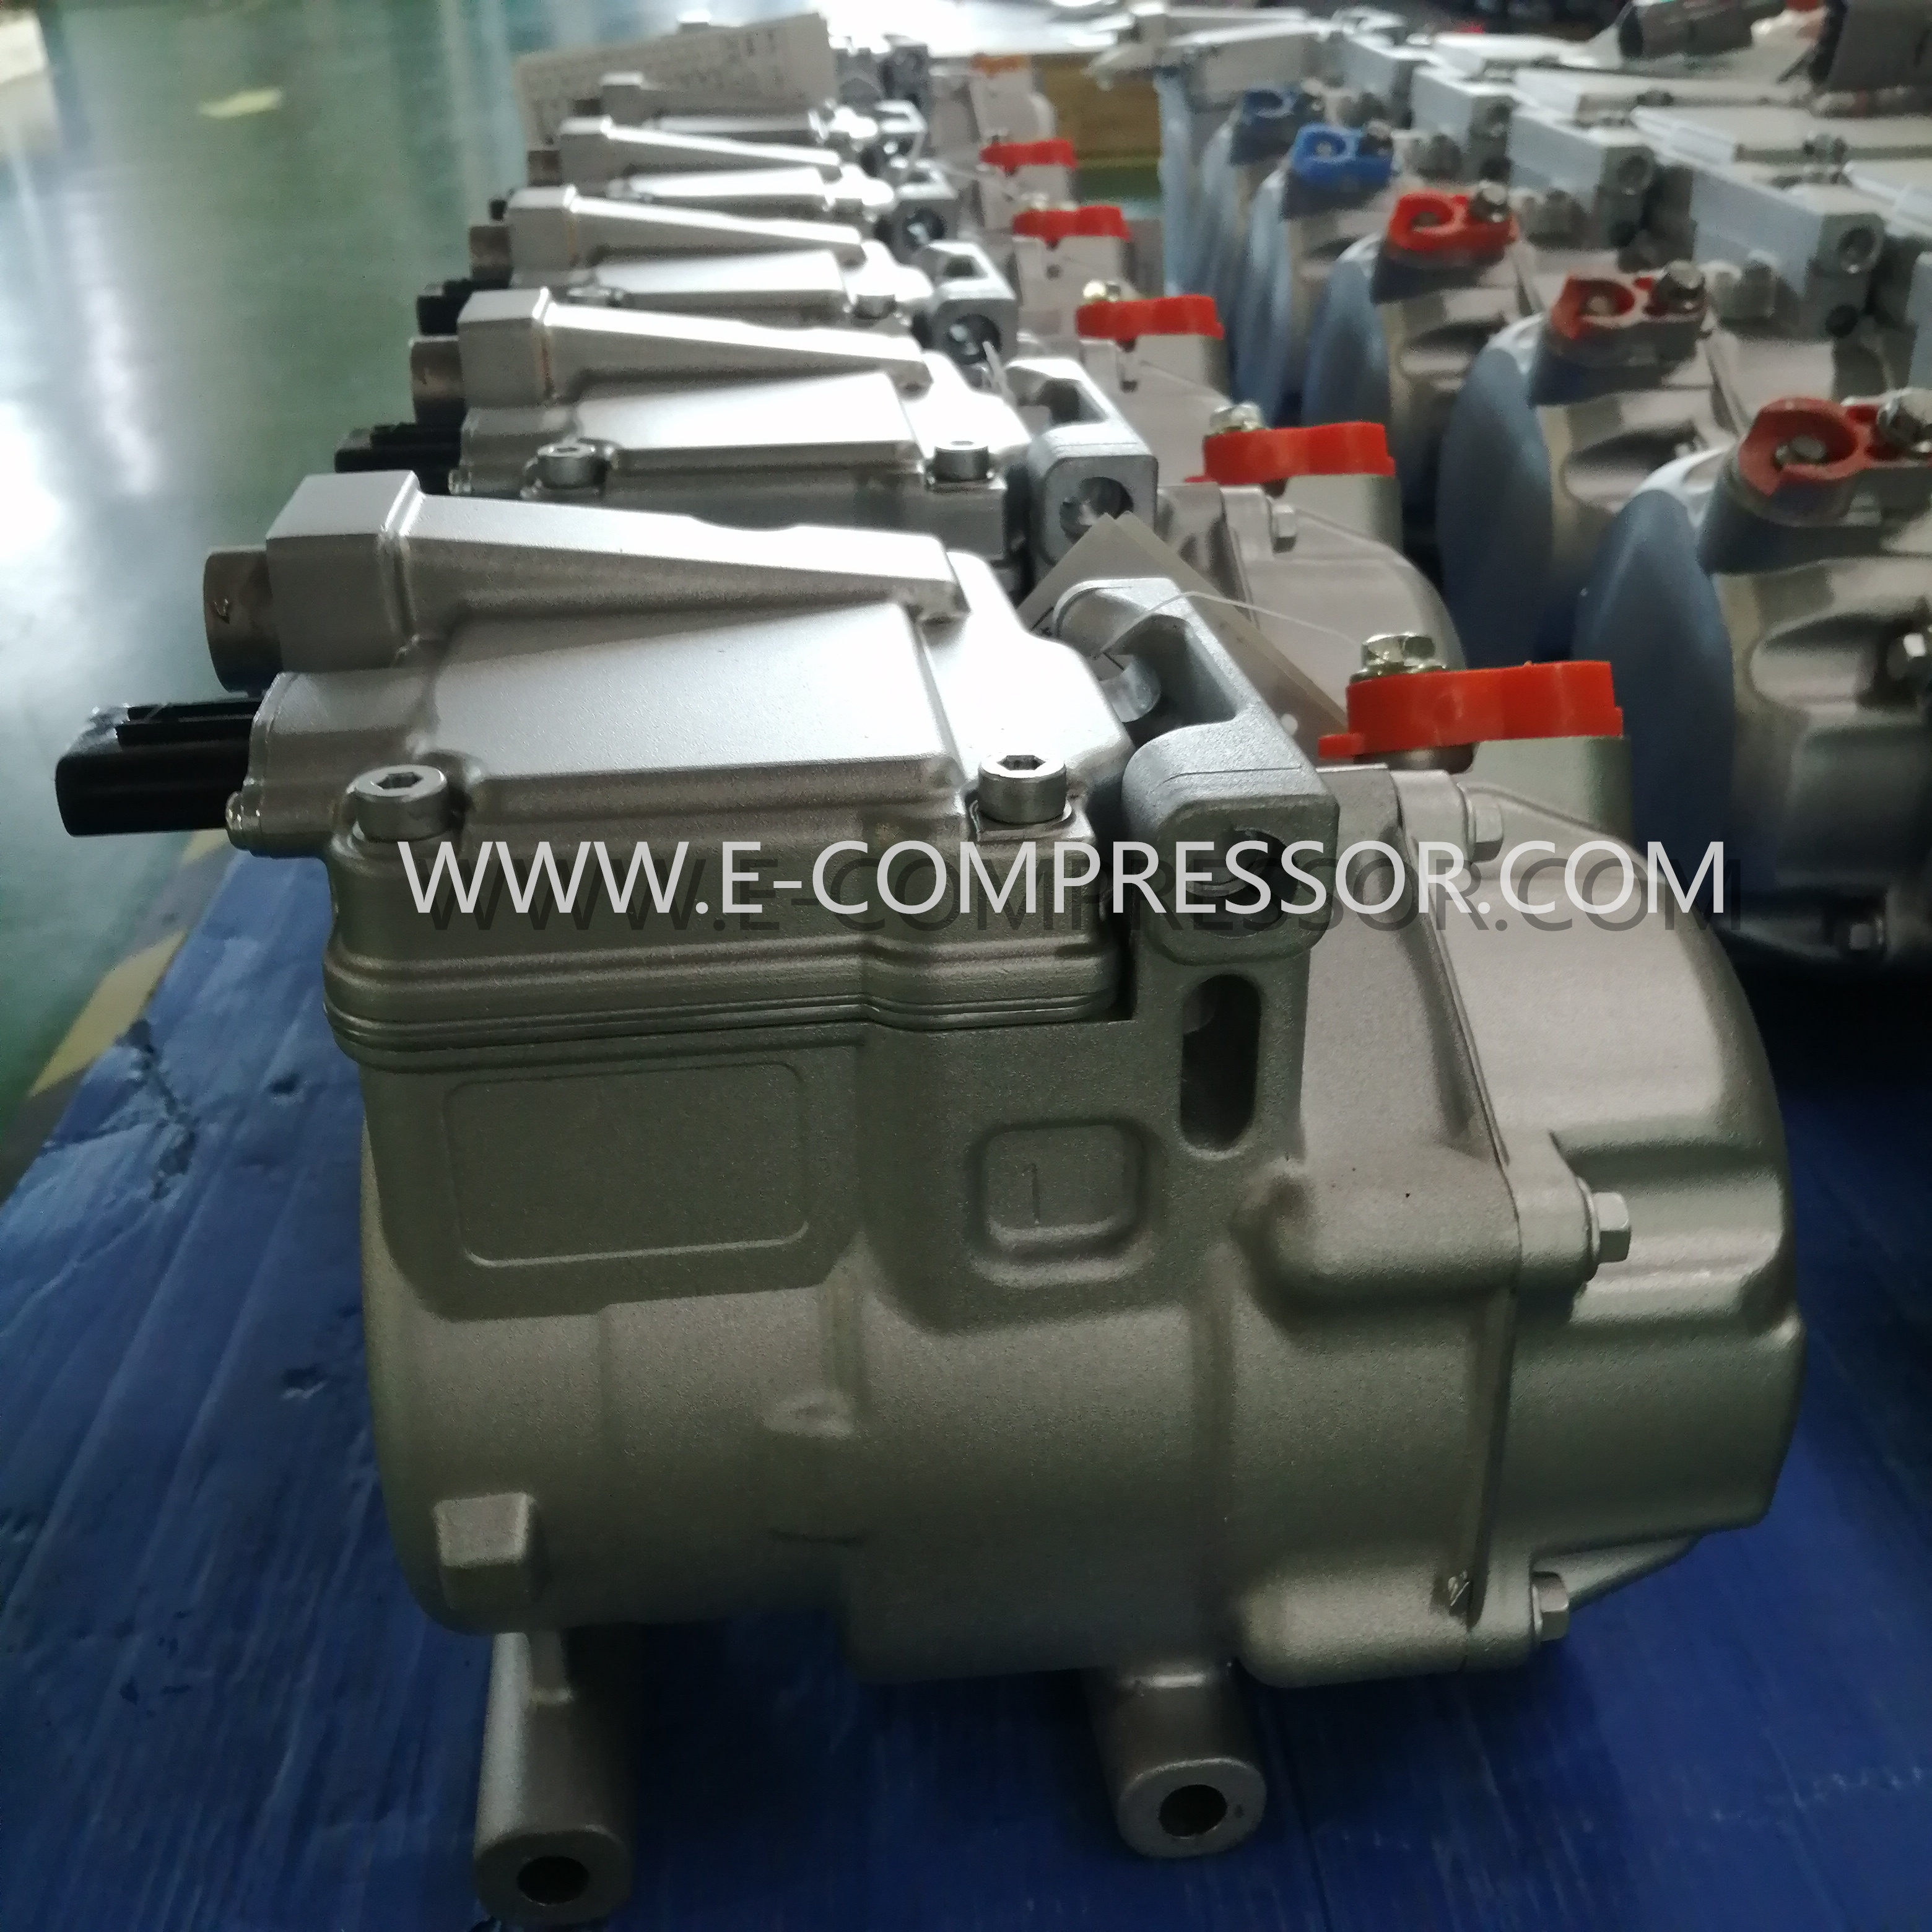 Our Compressors Are Ready to Ship to Italy